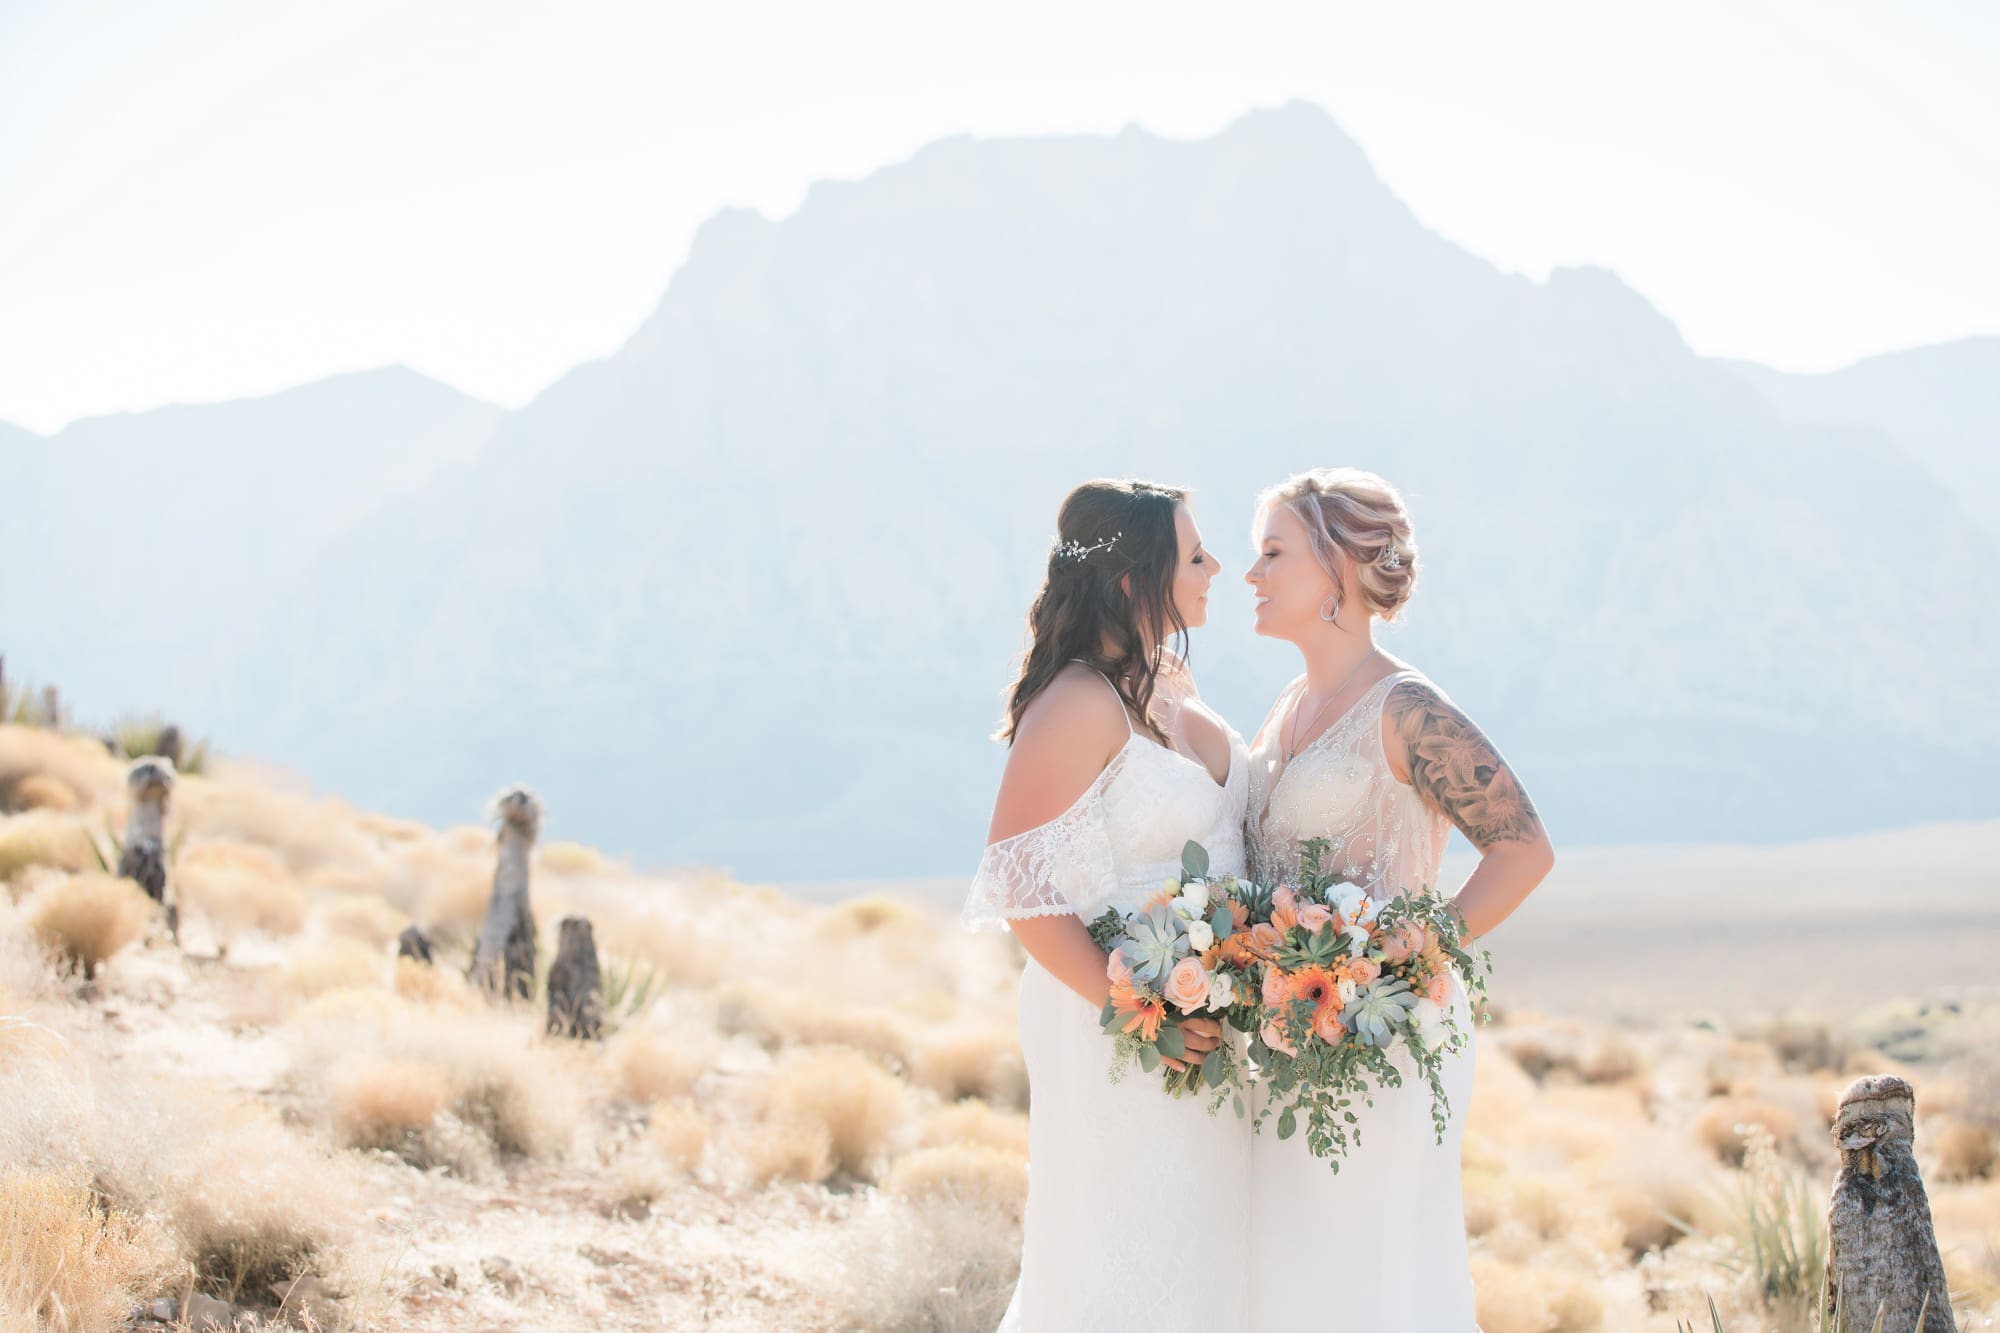 Larissa + Brittany: A Real Wedding in Overlook